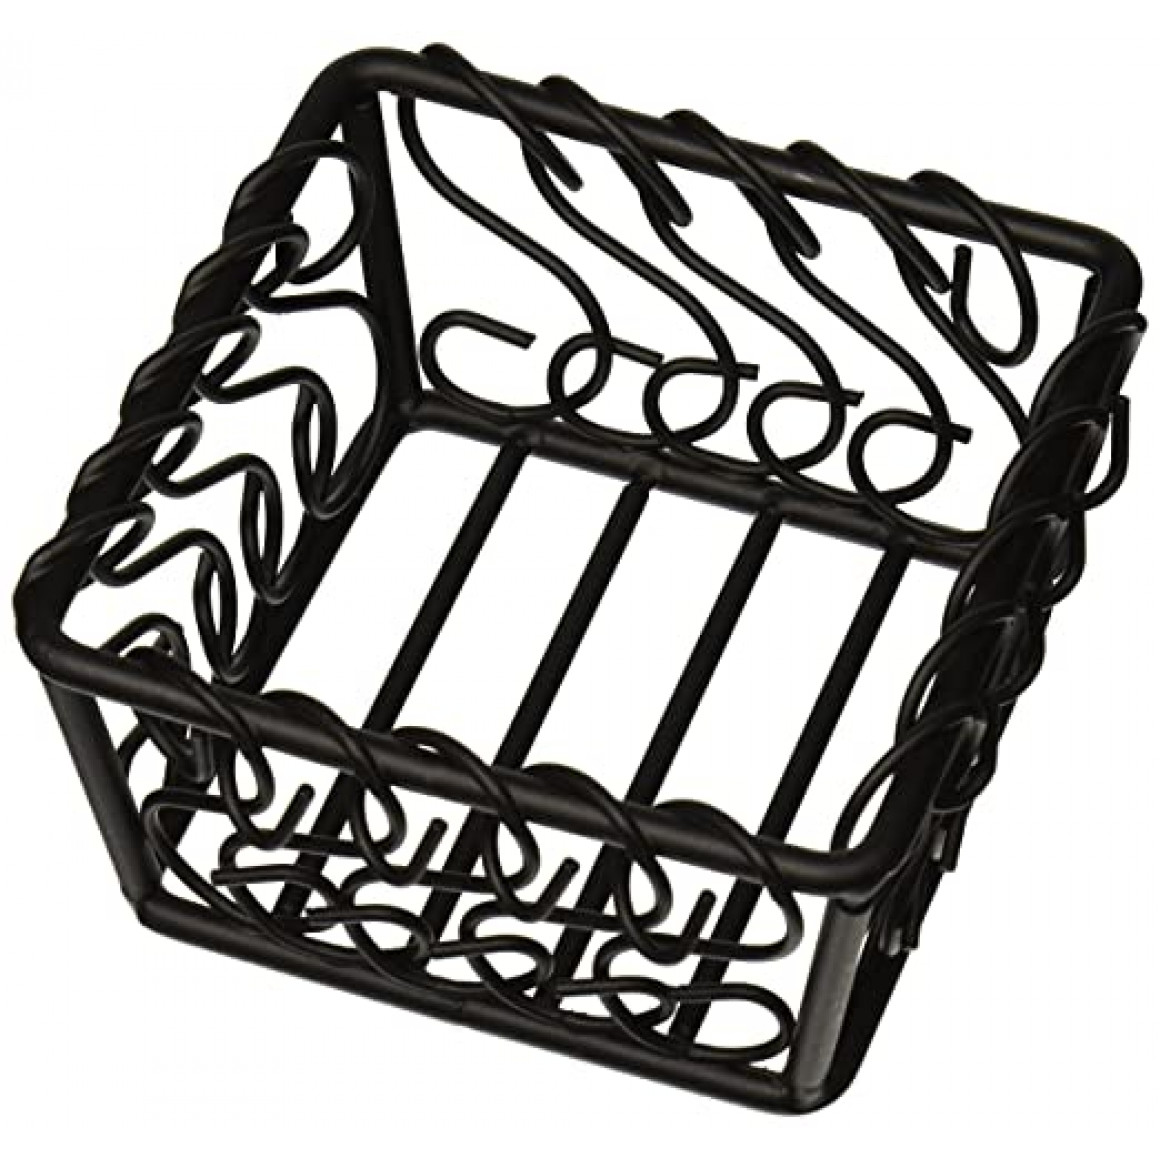 BASKET, WROUGHT IRON, SQUARE, SCROLL